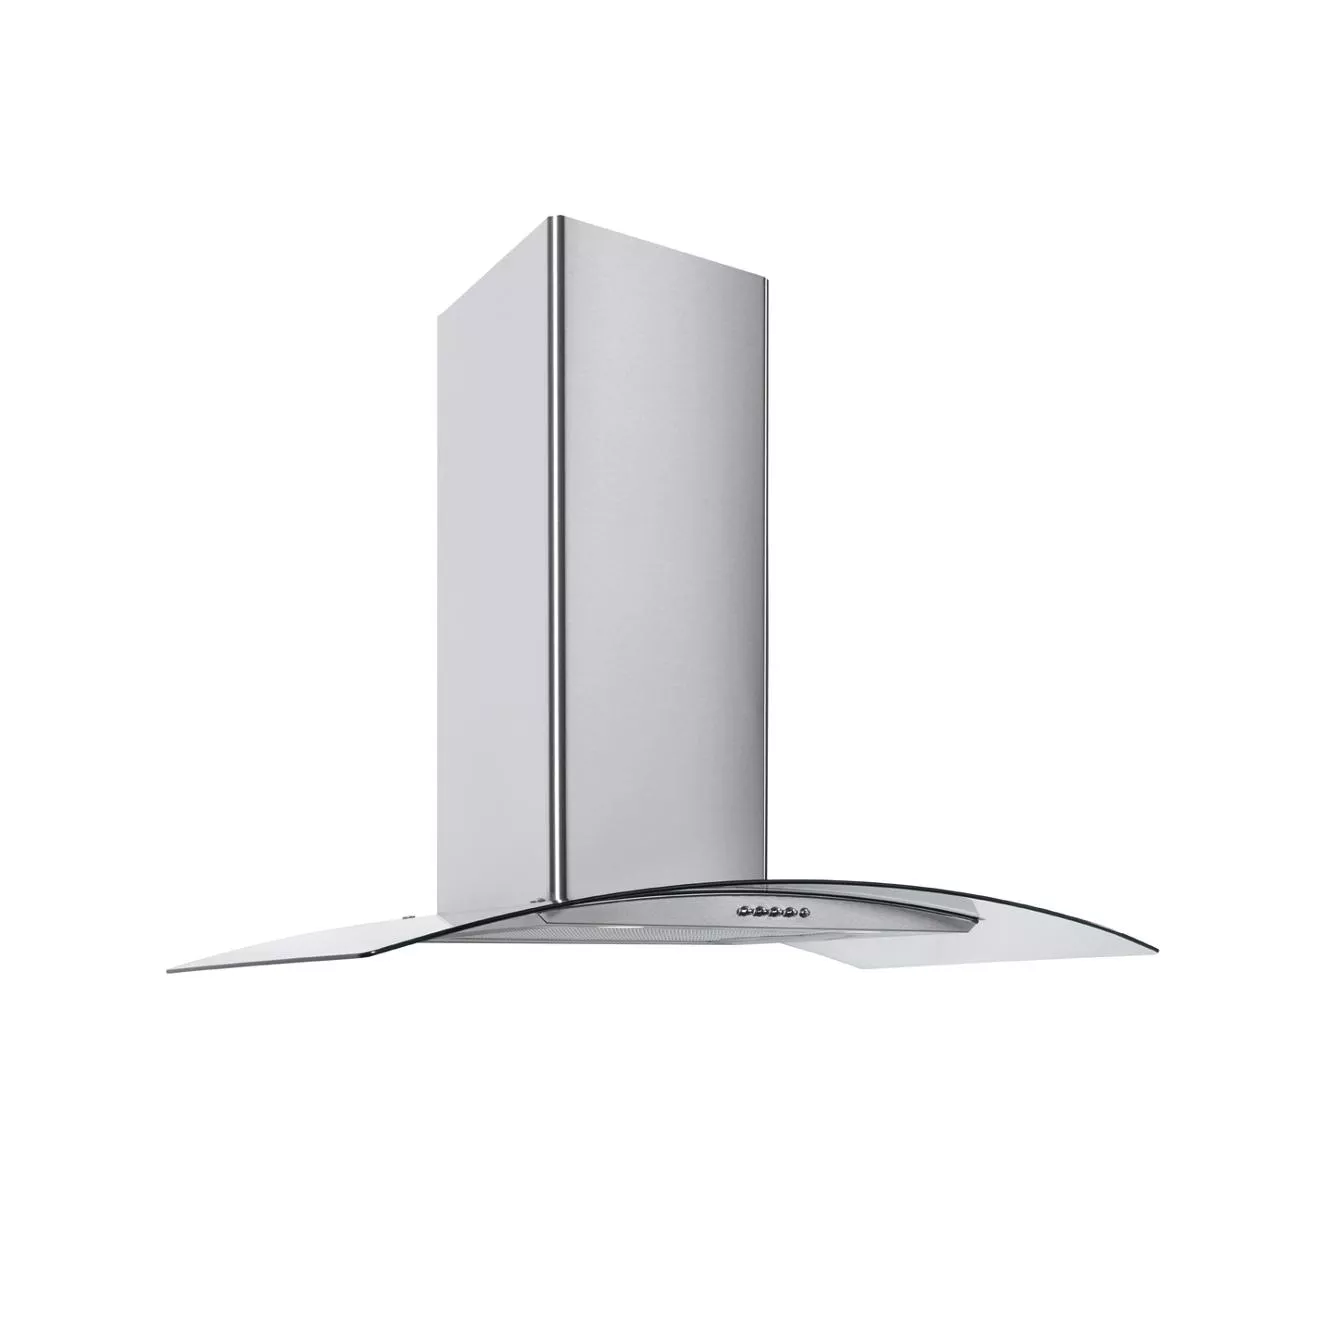 Culina CG60SSPF 60cm Curved Glass Chimney Hood (Stainless Steel)